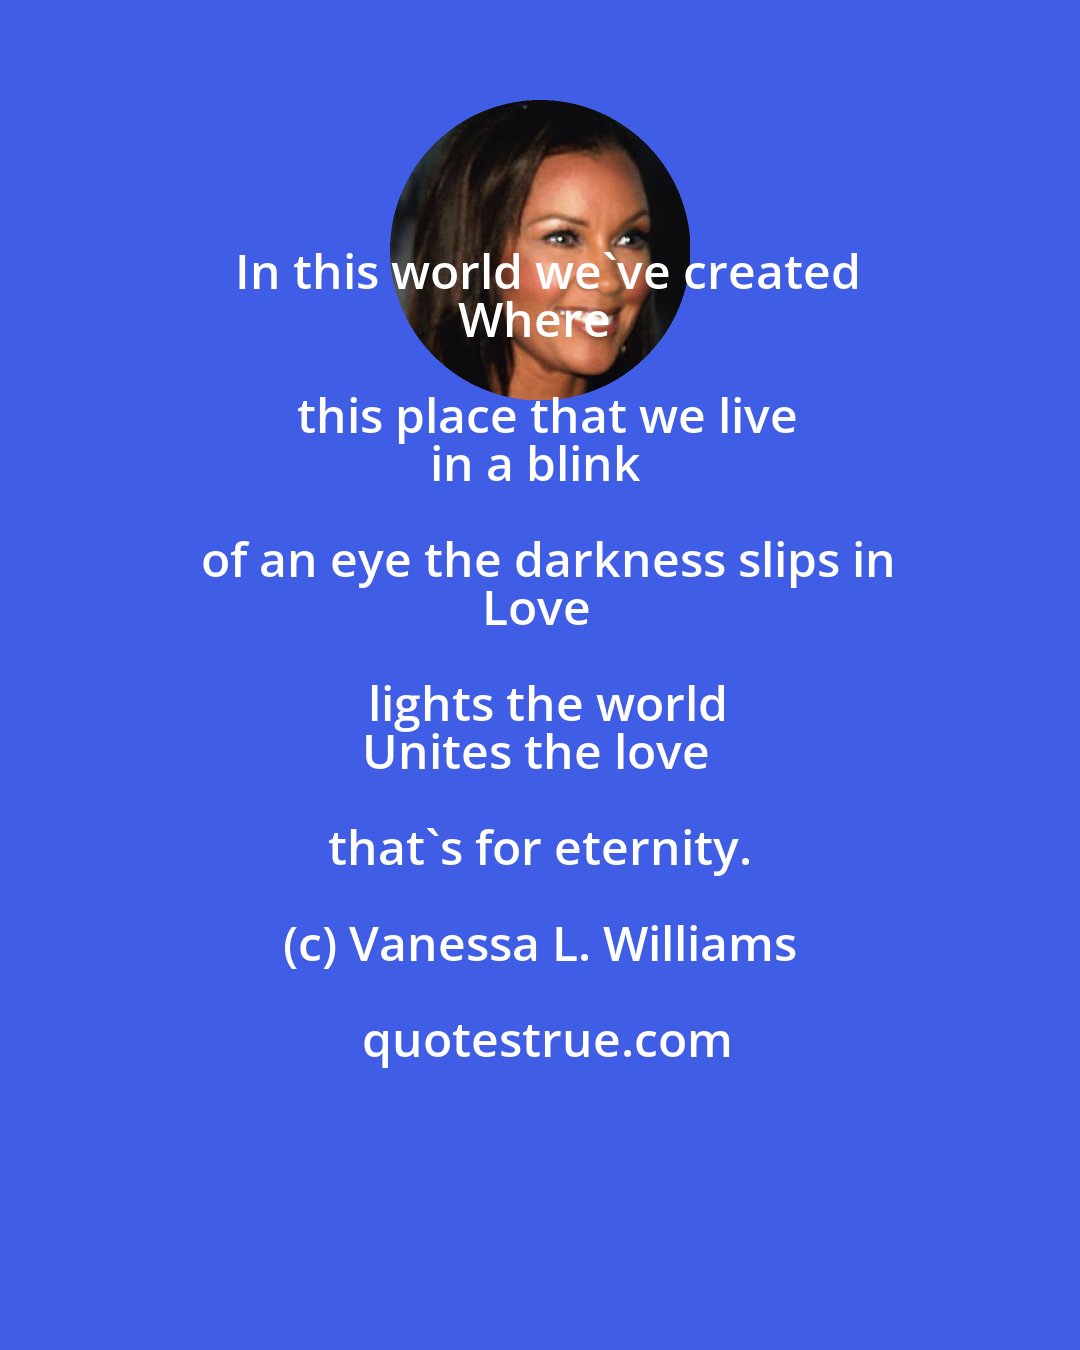 Vanessa L. Williams: In this world we've created
Where this place that we live
in a blink of an eye the darkness slips in
Love lights the world
Unites the love that's for eternity.